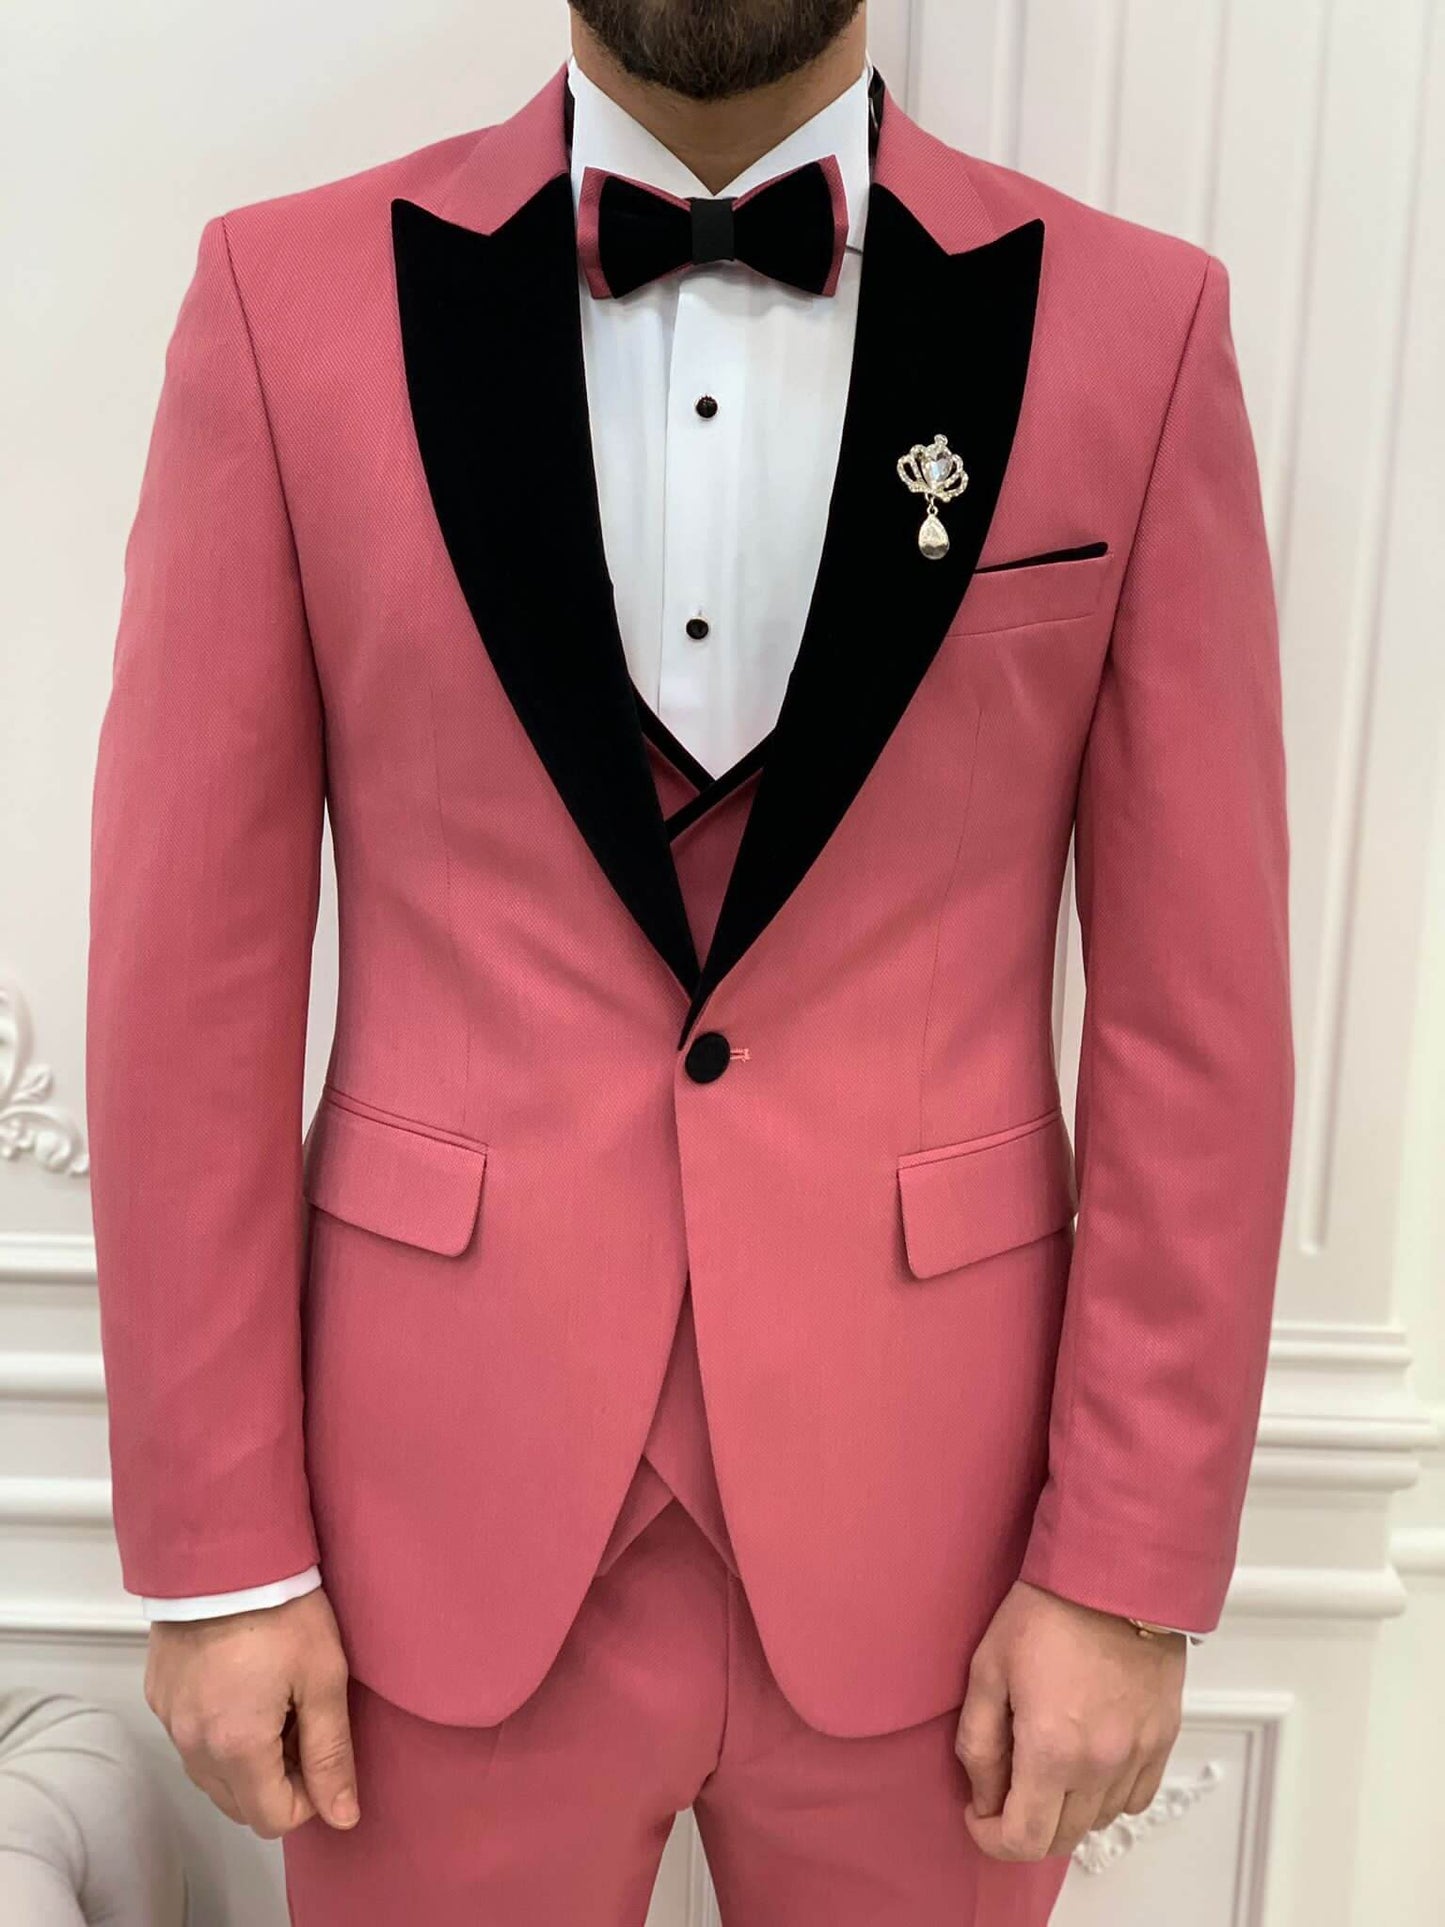 Man wearing Pink Tuxedo with Peak Lapel, Single Button, Slim-Fit Italian Cut ready for a  Formal Event